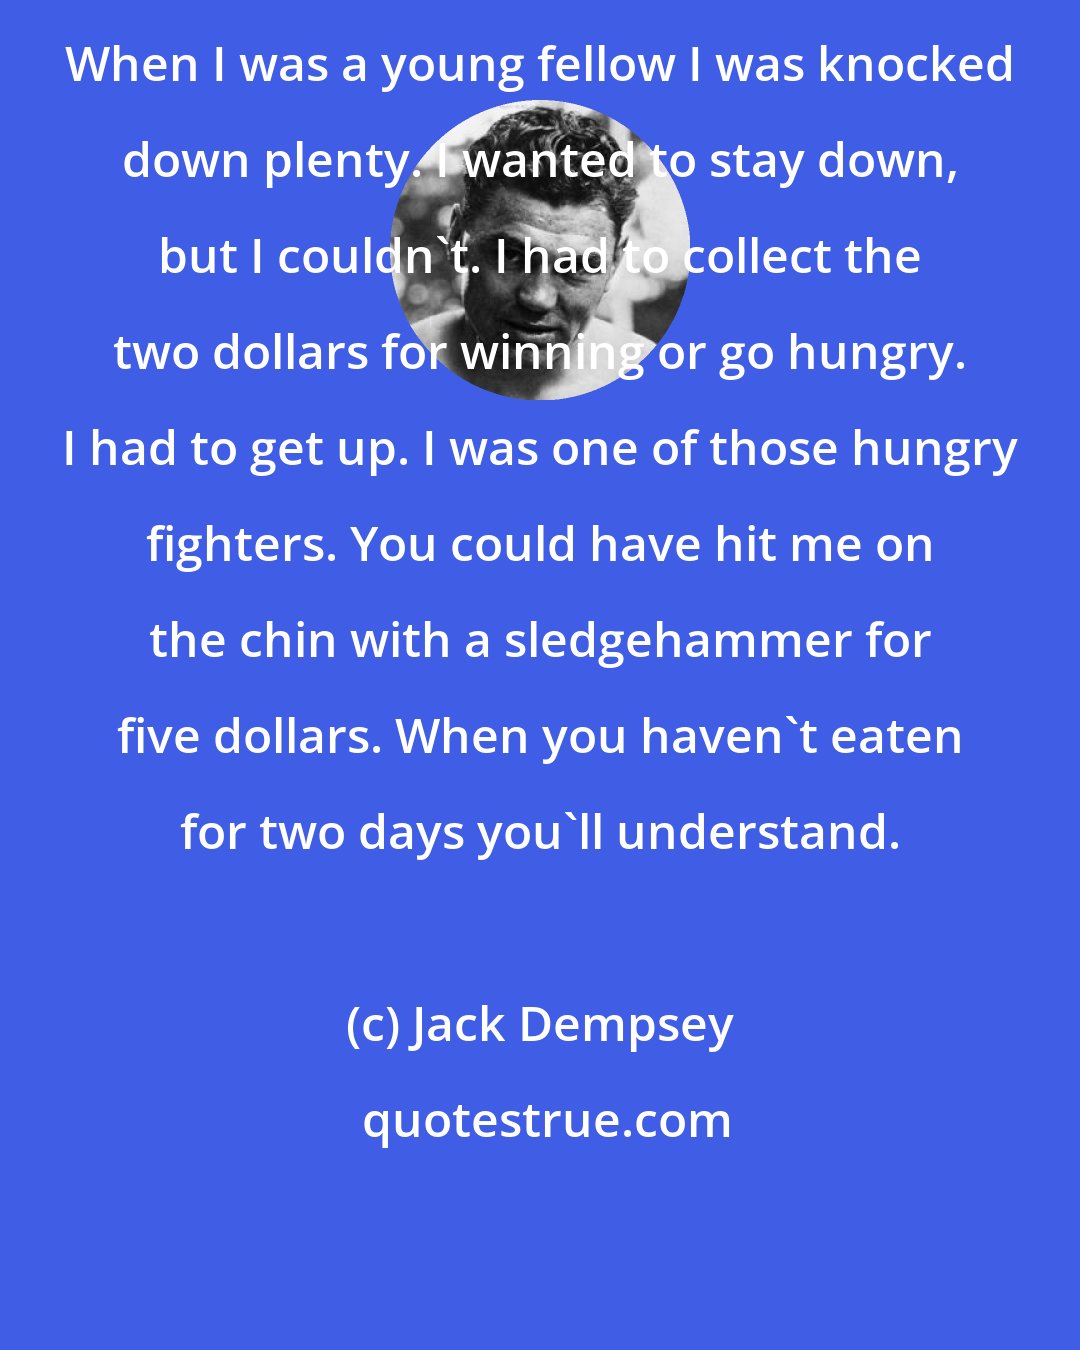 Jack Dempsey: When I was a young fellow I was knocked down plenty. I wanted to stay down, but I couldn't. I had to collect the two dollars for winning or go hungry. I had to get up. I was one of those hungry fighters. You could have hit me on the chin with a sledgehammer for five dollars. When you haven't eaten for two days you'll understand.